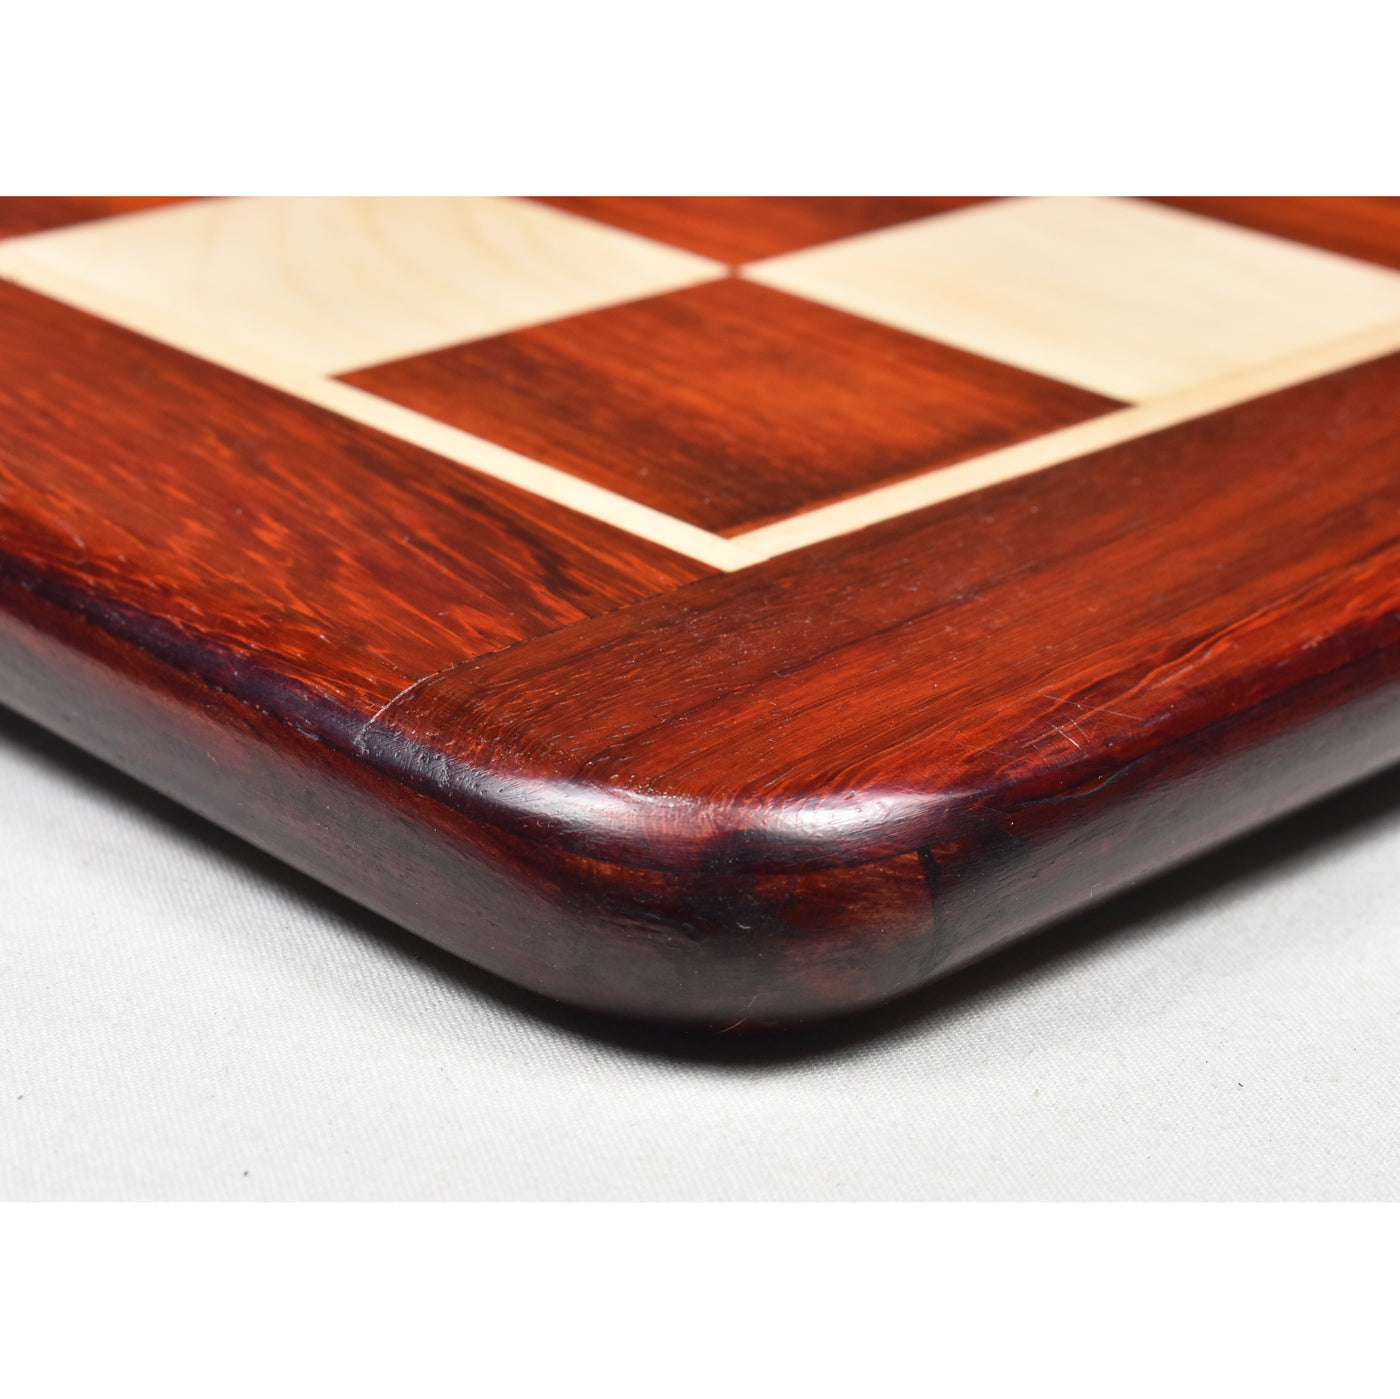 Bud Rosewood & Maple Wood Chess board with 55 mm Wooden Square -  Chess Set Handmade